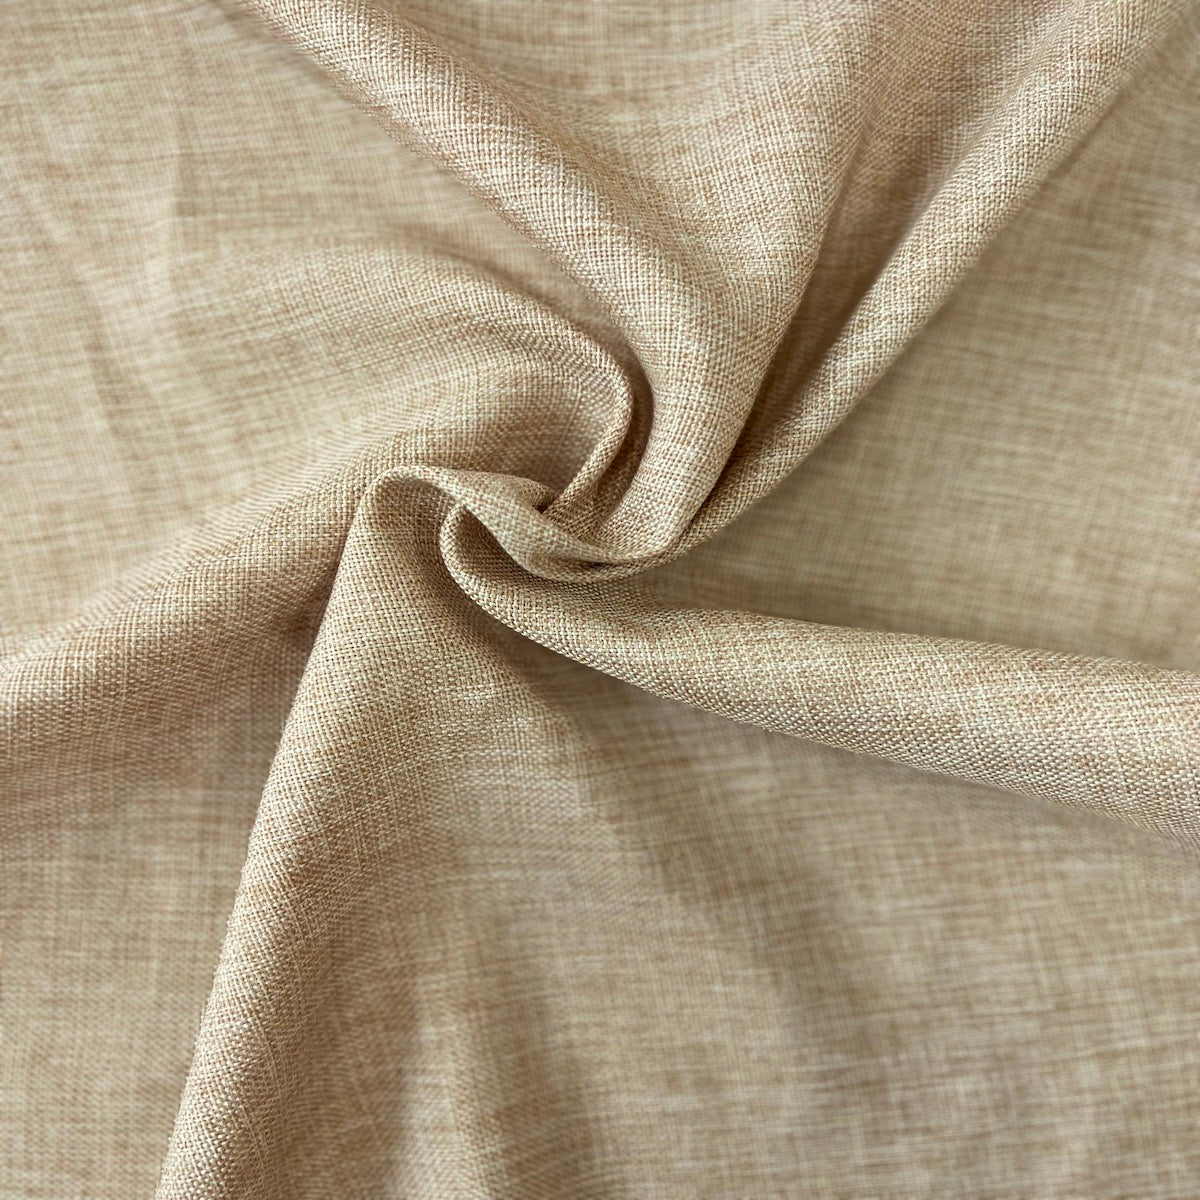 Natural Cotton Muslin Fabric 46 Inches Wide by 1 Algeria